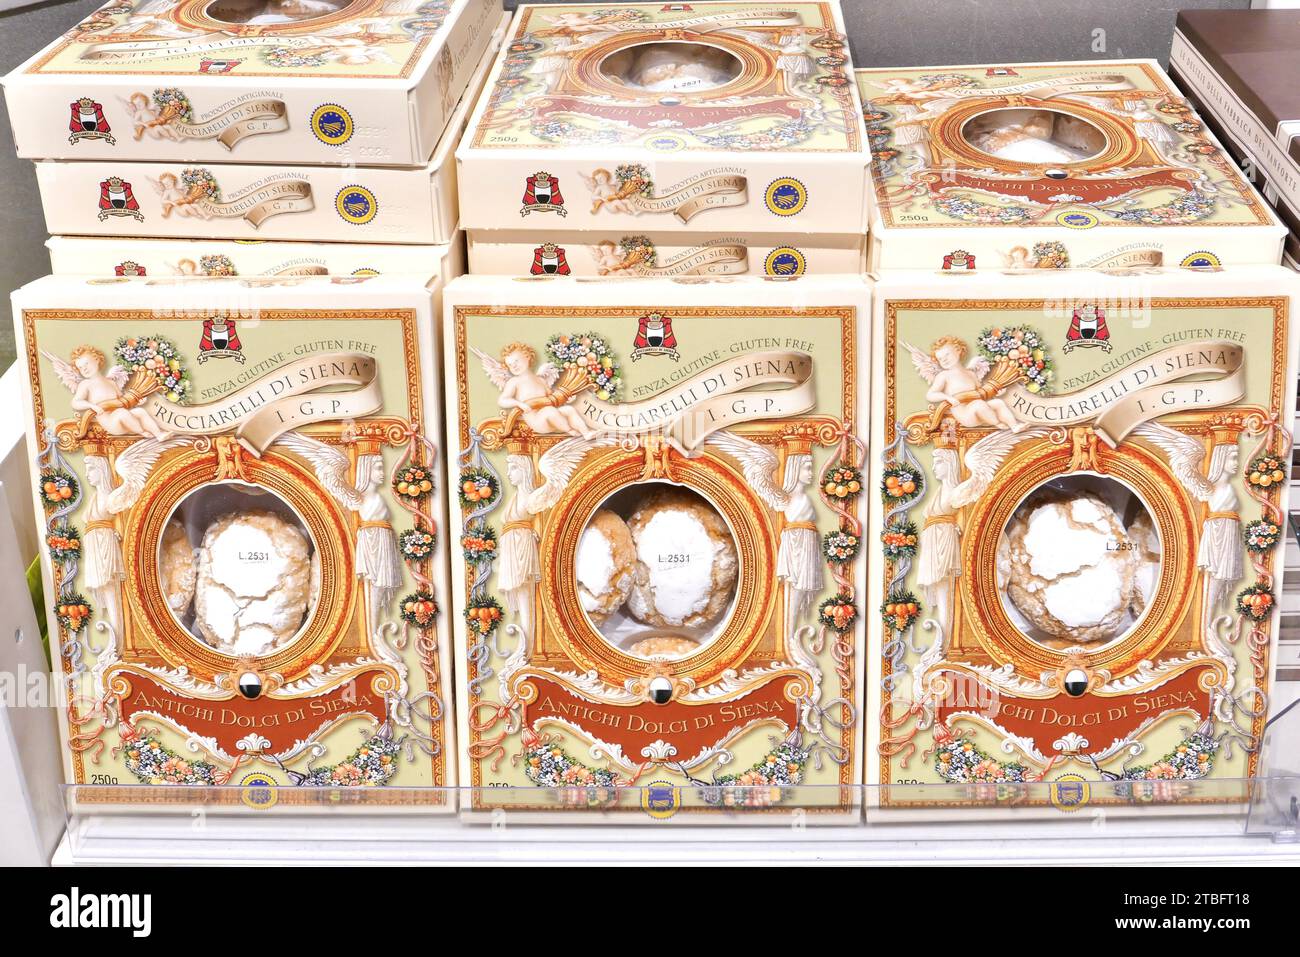 ANTICHI DOLCI DI SIENA RICCIARELLI BOXES OF CHRISTMAS BISCUITS ON DISPLAY INSIDE THE FOOD STORE Stock Photo